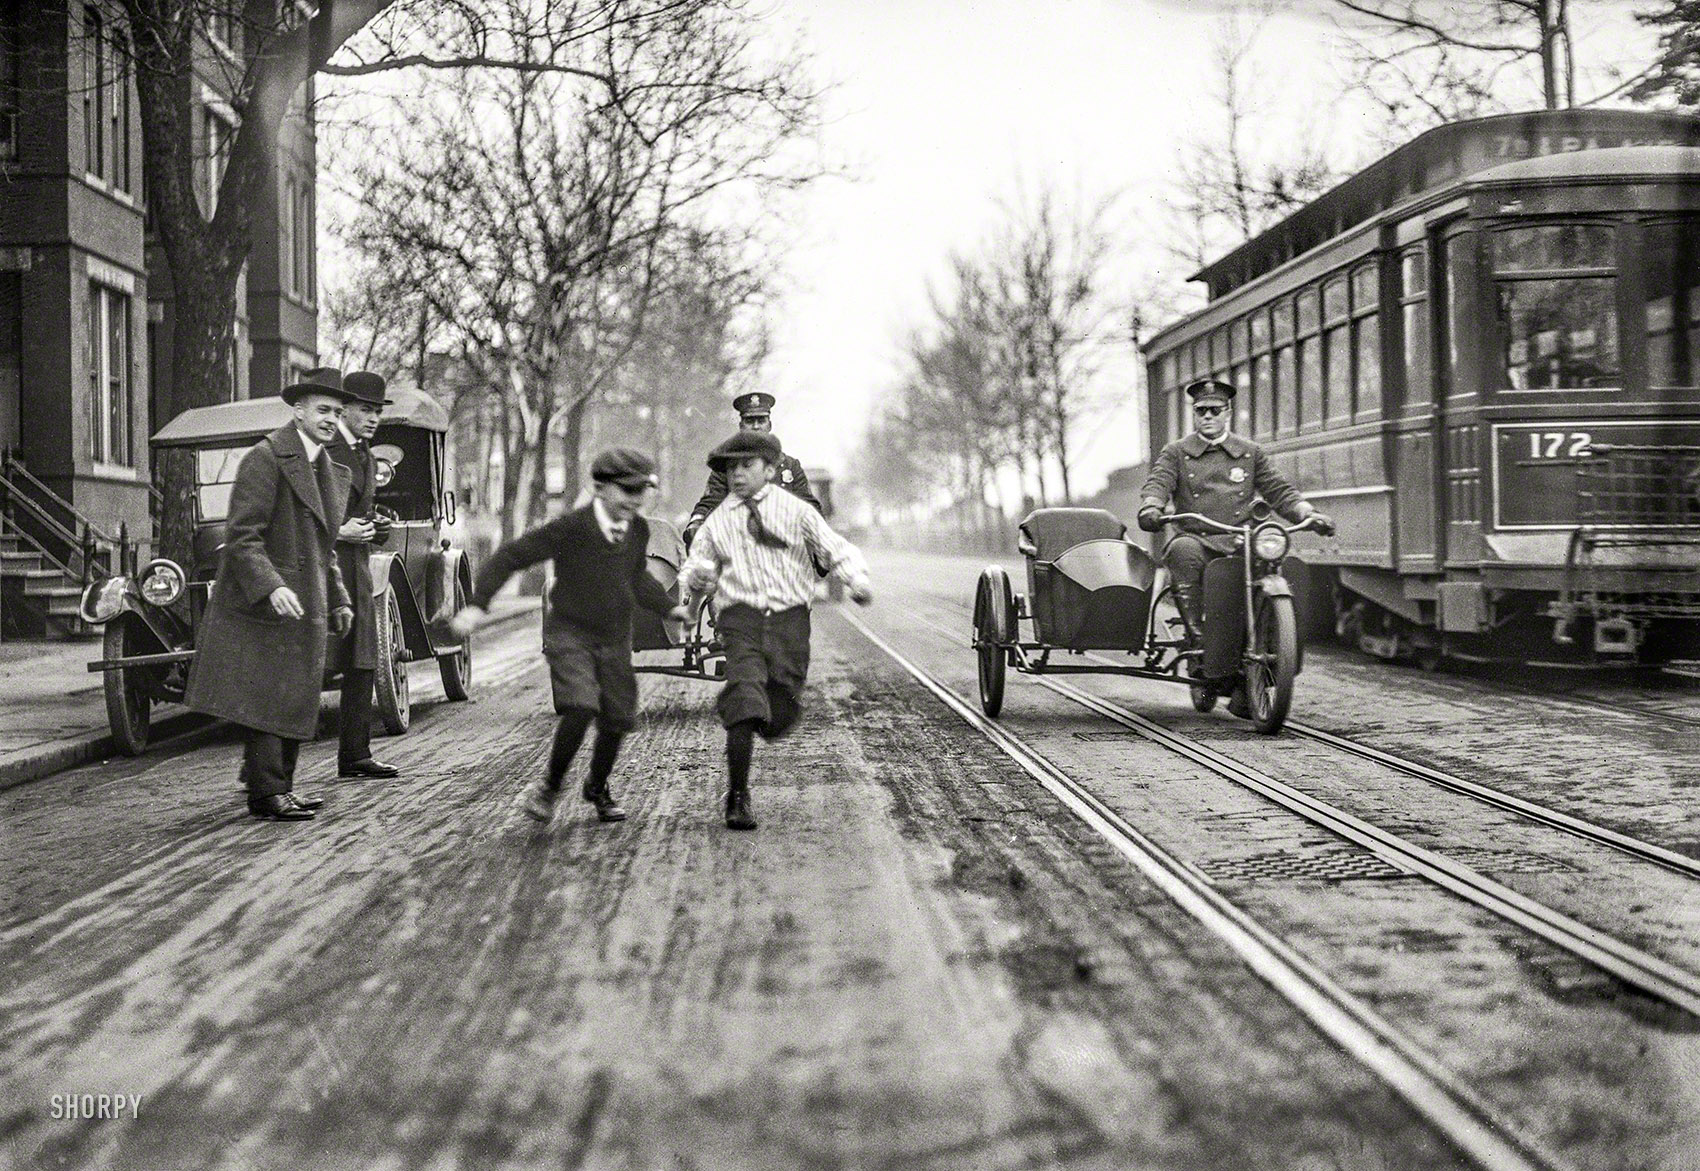 Washington, D.C., circa 1922. "NO CAPTION (Children, police motorcycles with sidecars, and streetcar in street)." From a series of photos whose subject seems to be traffic safety. Harris & Ewing Collection glass negative. View full size.